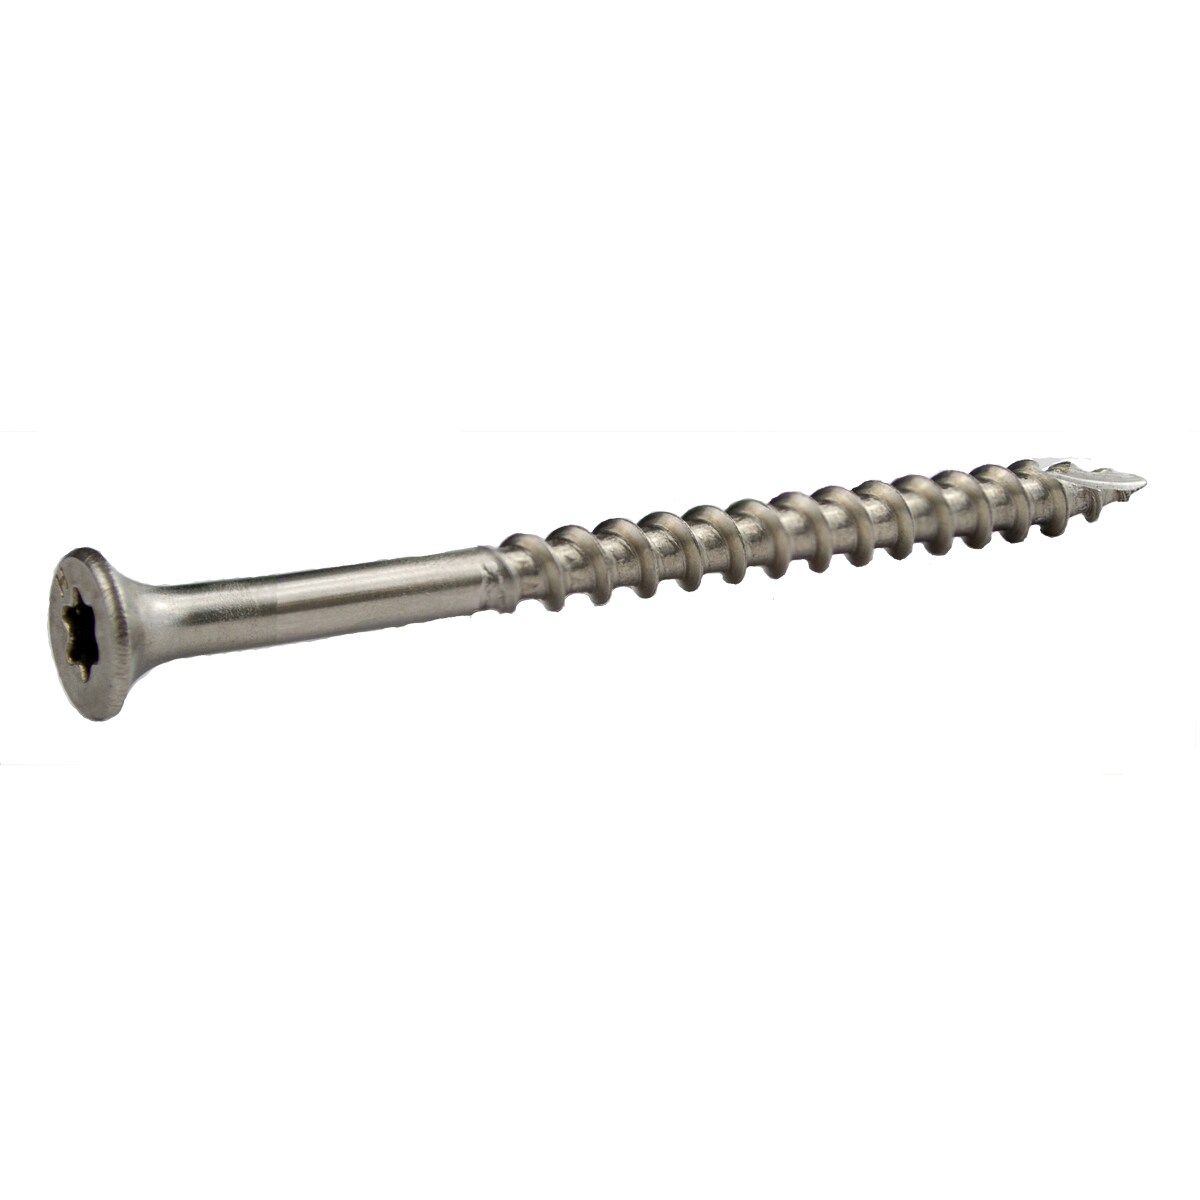 TIMBADECK PROFESSIONAL STAINLESS STEEL DECKING SCREWS 4,5 X 65mm VARIOUS AMOUNTS 